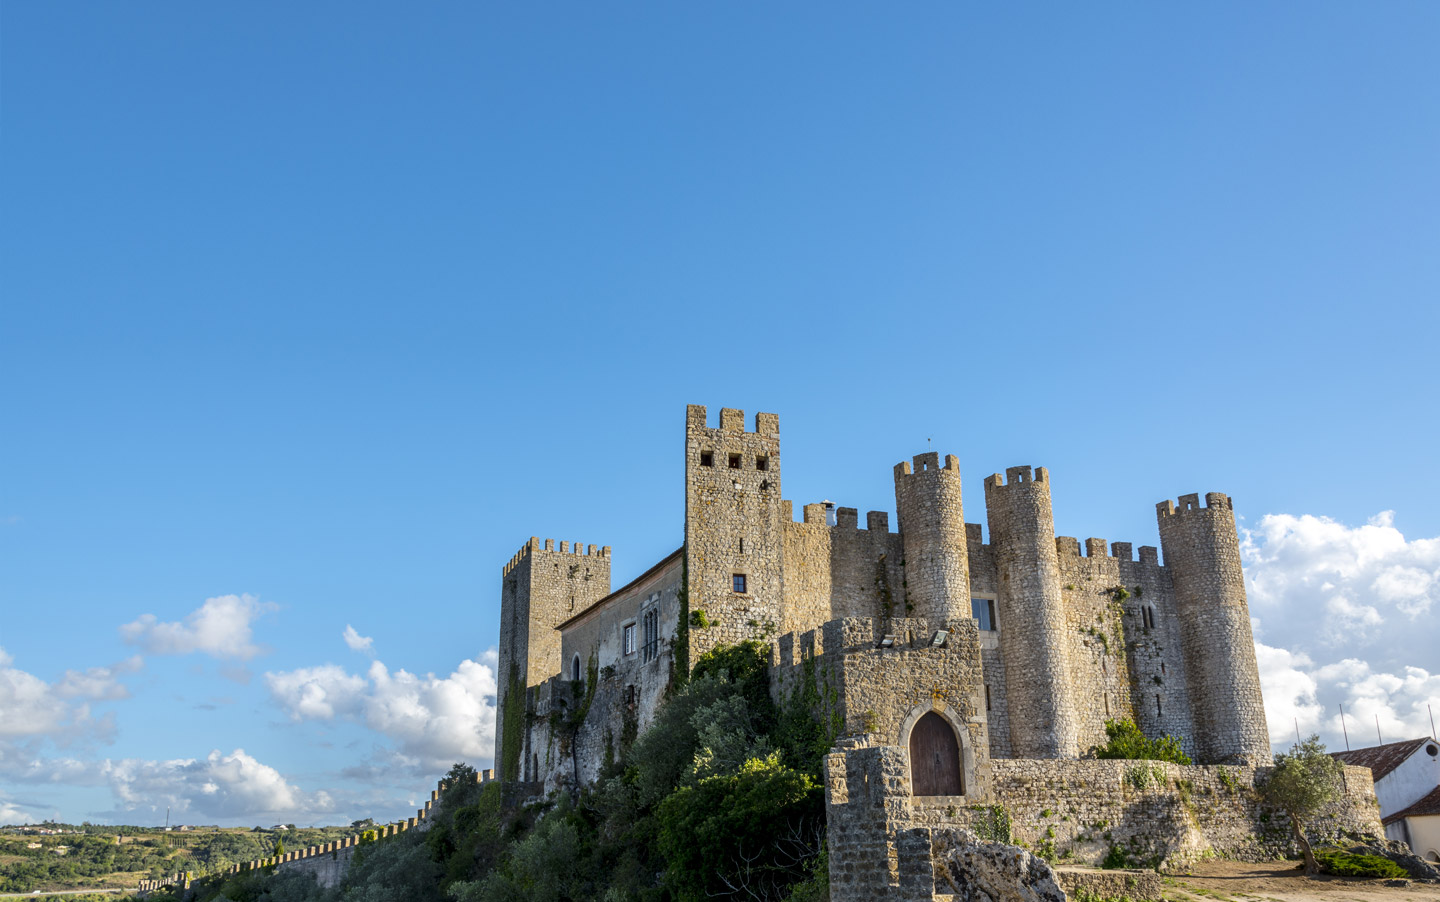 Service Learning trip to Óbidos, Portugal